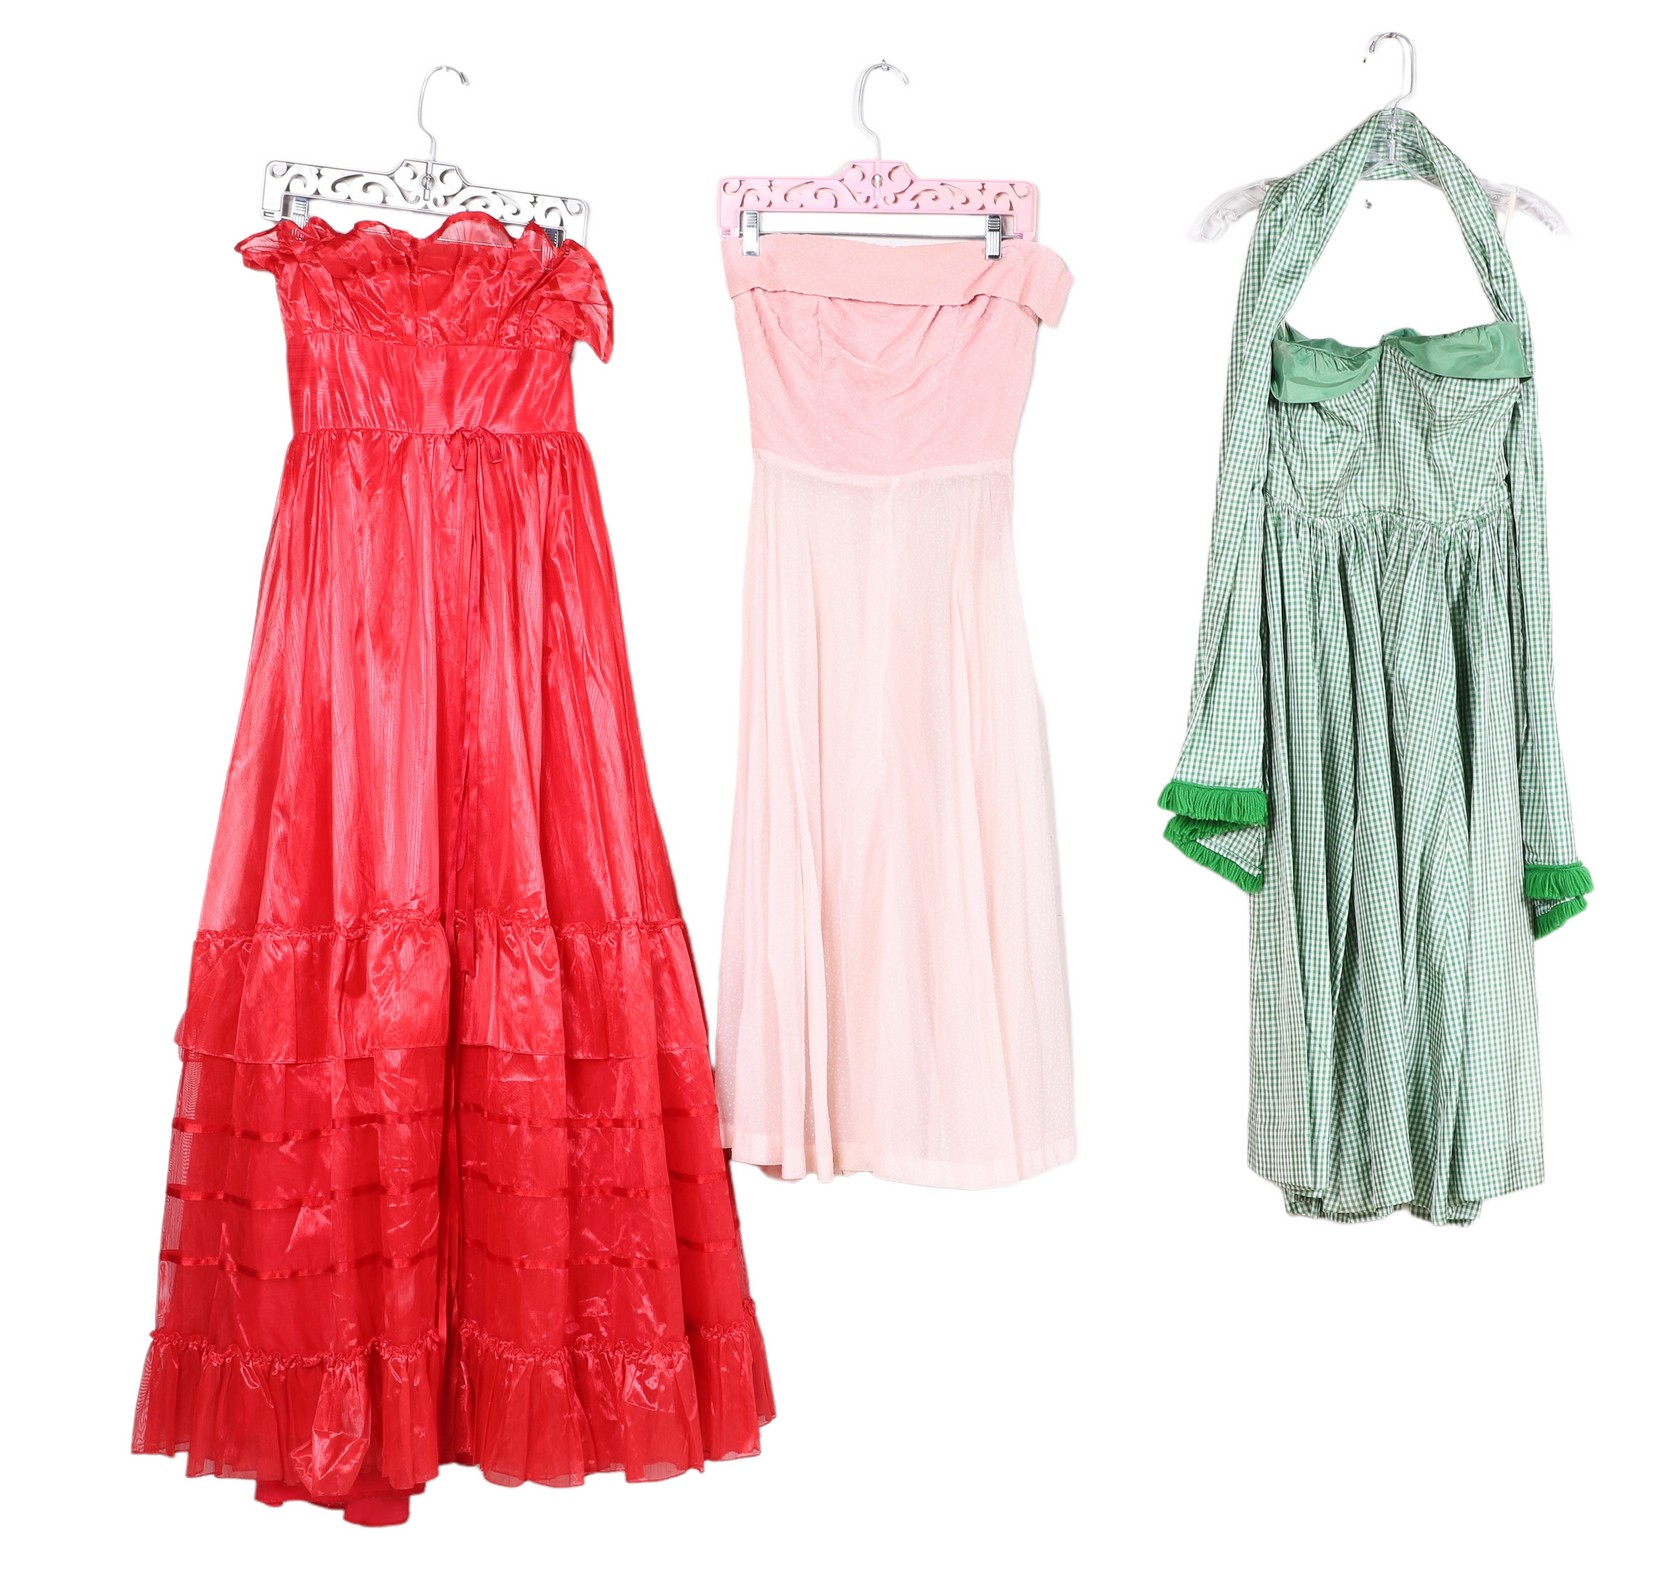 (3) 1950s strapless party dresses to